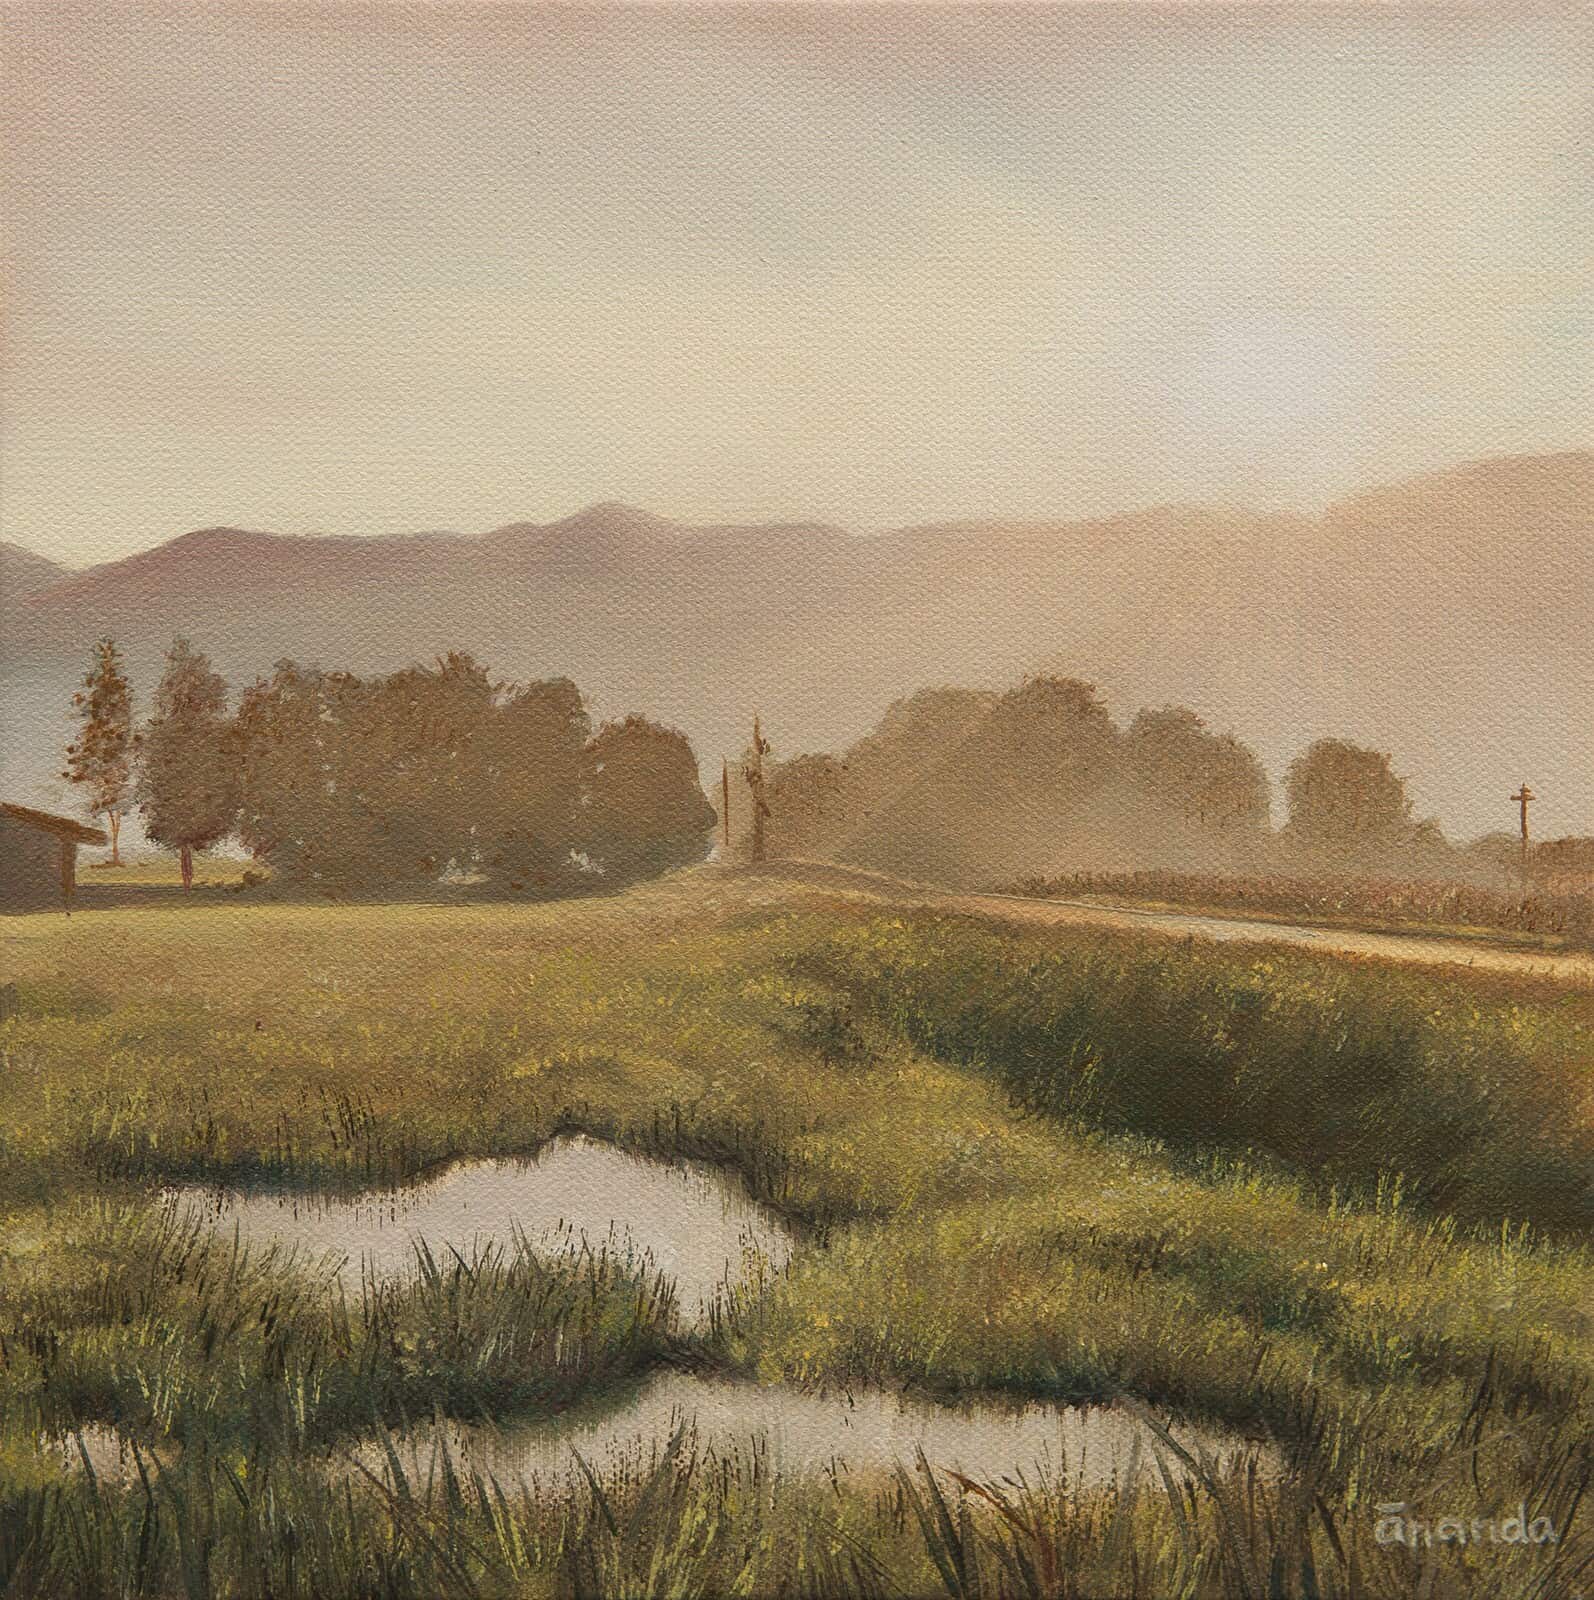 Contemporary Landscape Art. Title: Fraser Valley, Oil on Canvas, 10 x 10 in by Canadian Artist Ananda Dhama.